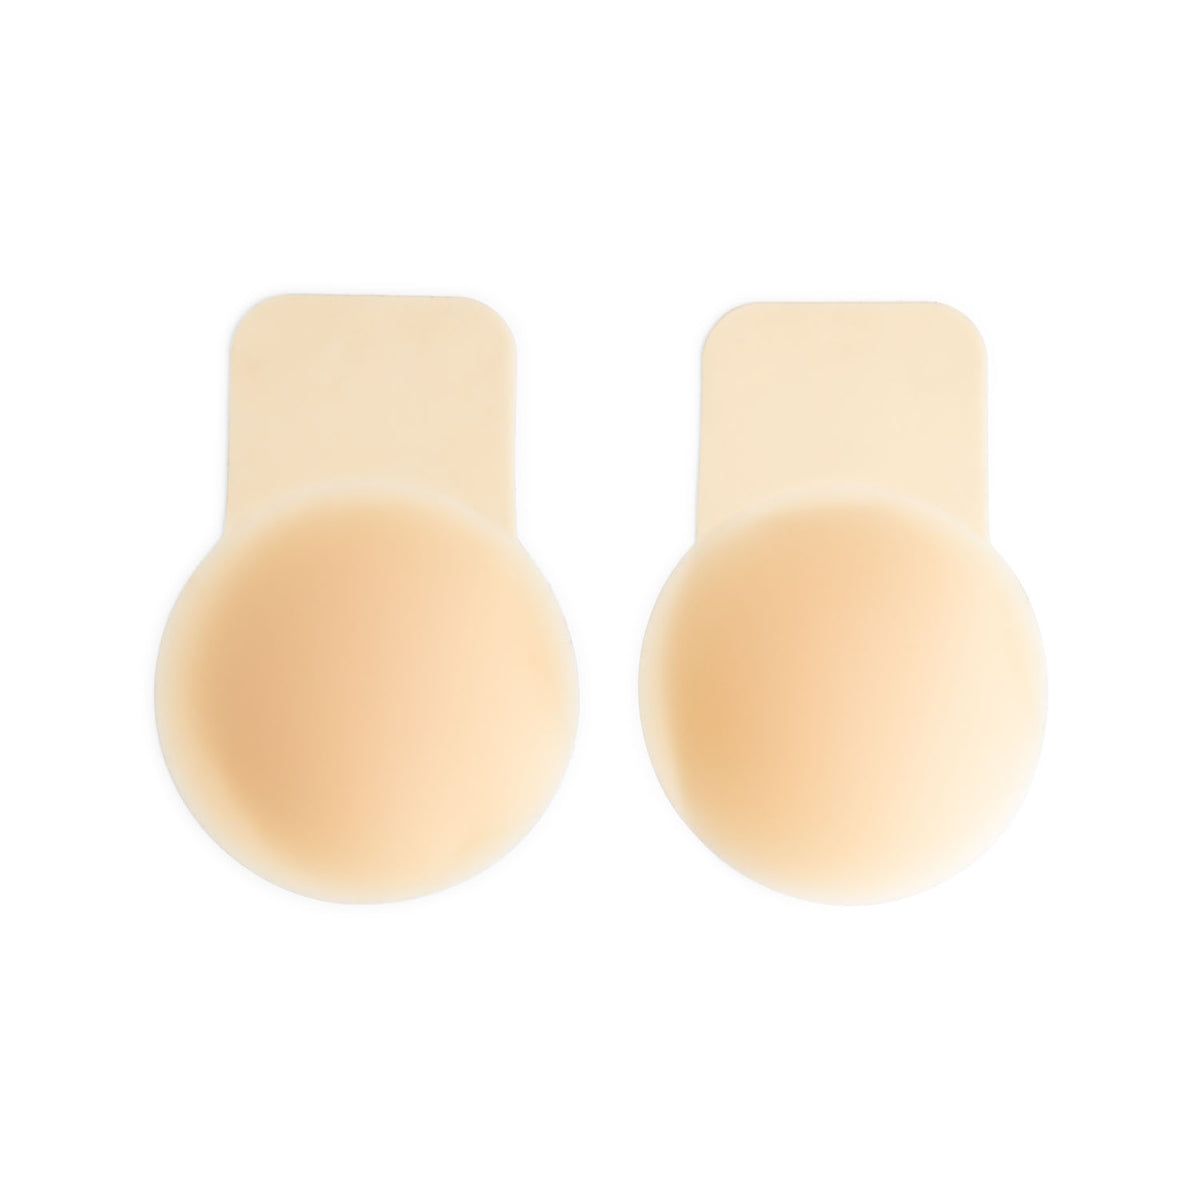 ByeBra Sculpting Silicone Lifts with wire – Charles Fay